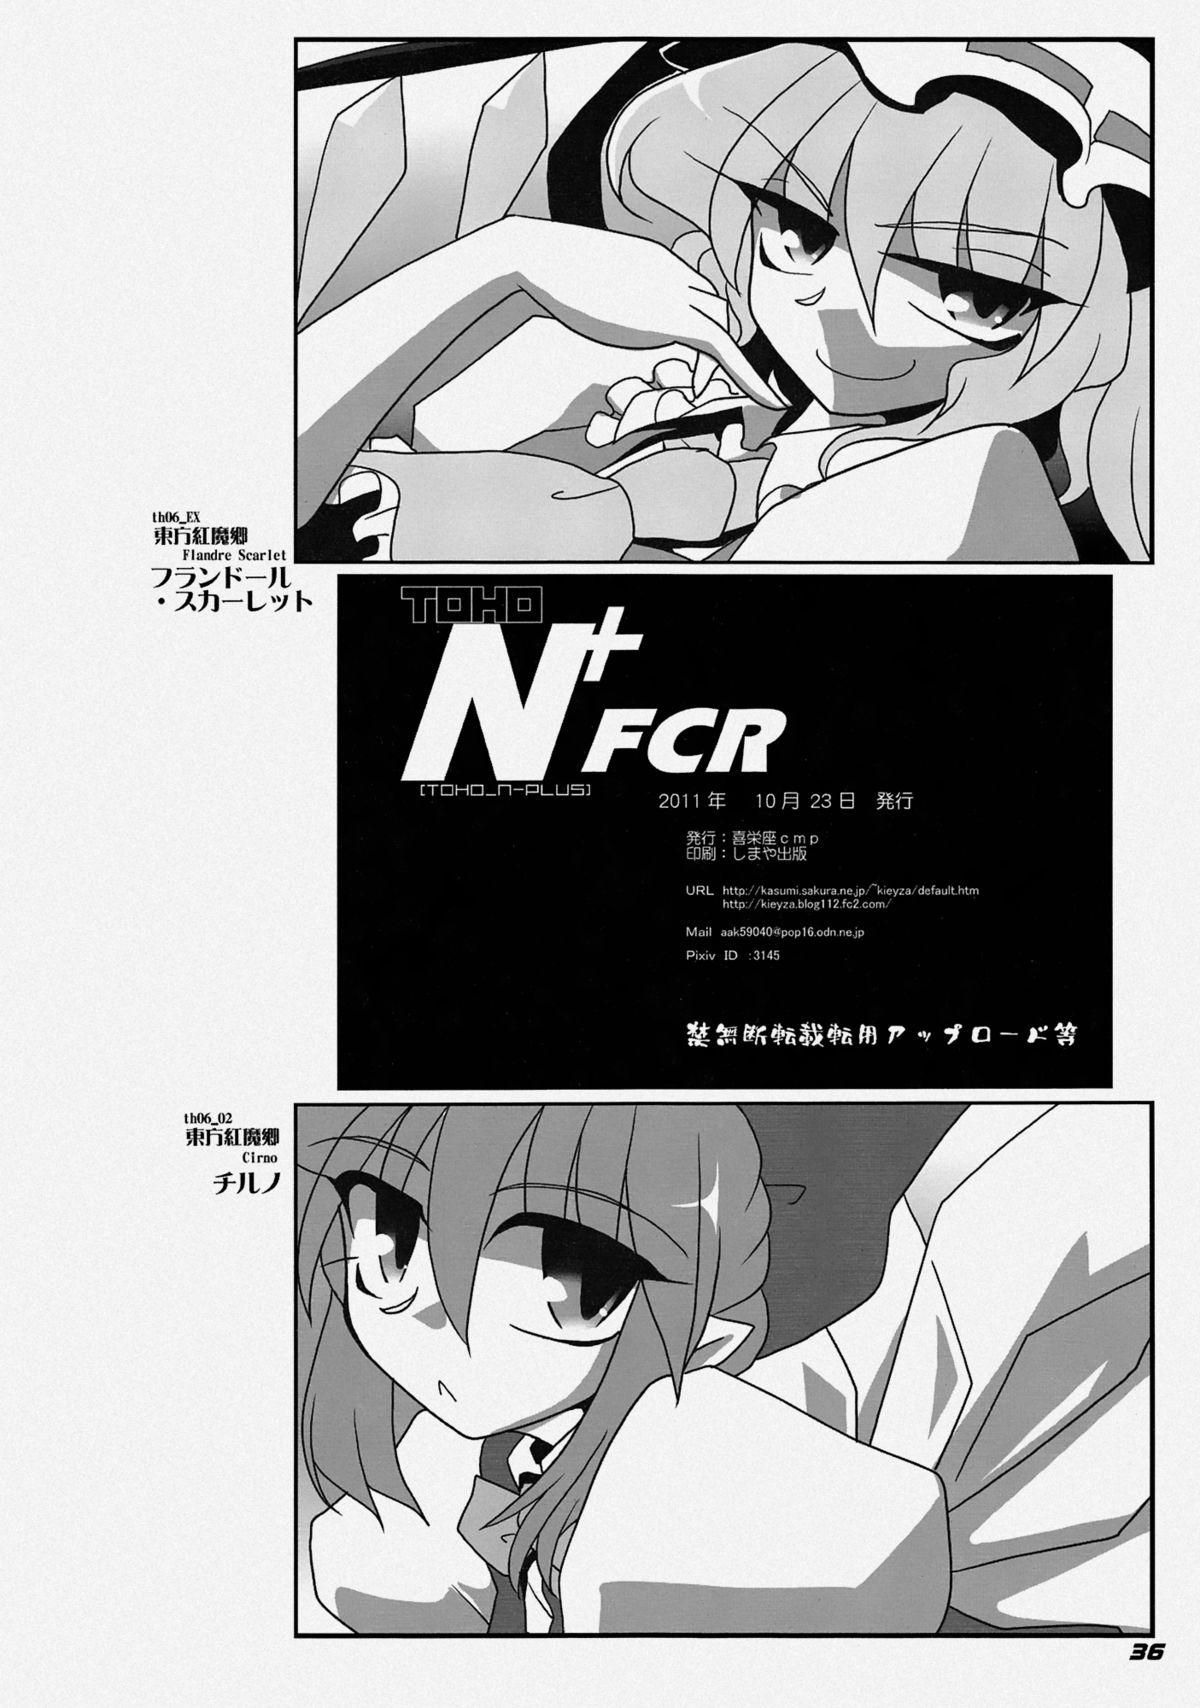 Cocksuckers TOHO N+ FCR - Touhou project Hotporn - Page 39